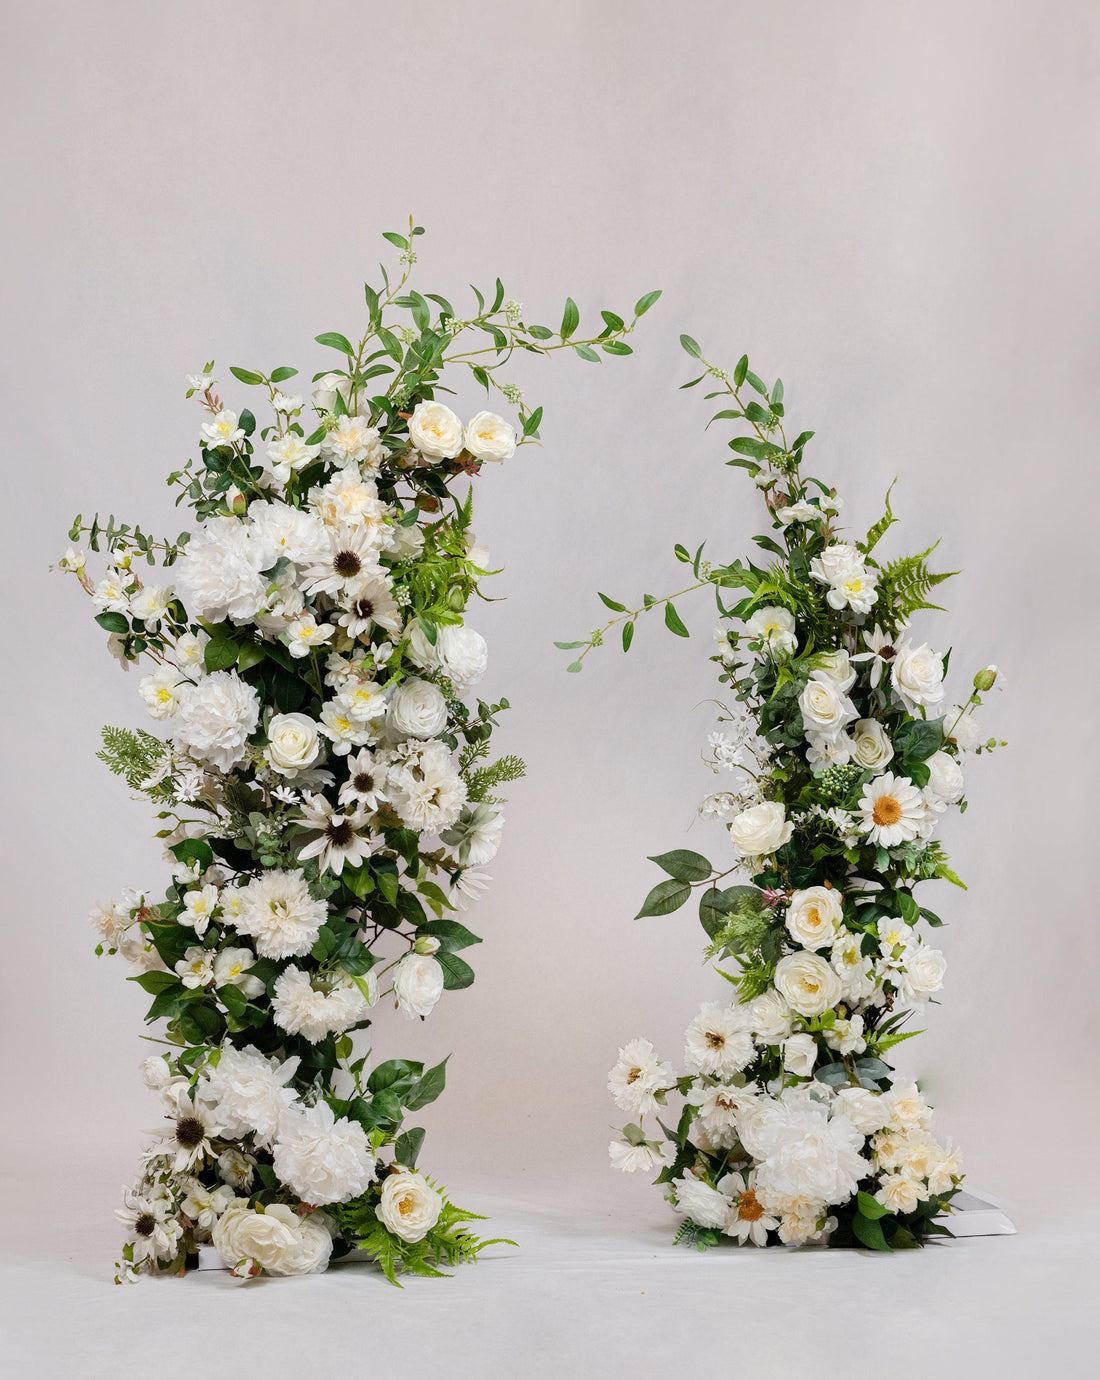 Enhance your event with this two-piece set featuring white artificial floral elements—peonies, roses, camellias, daisies, and carnations. Perfect for rentals in Edmonton, Sherwood Park, Leduc, St. Albert, it seamlessly blends with other decor, bringing effortless grace and elegance to any space